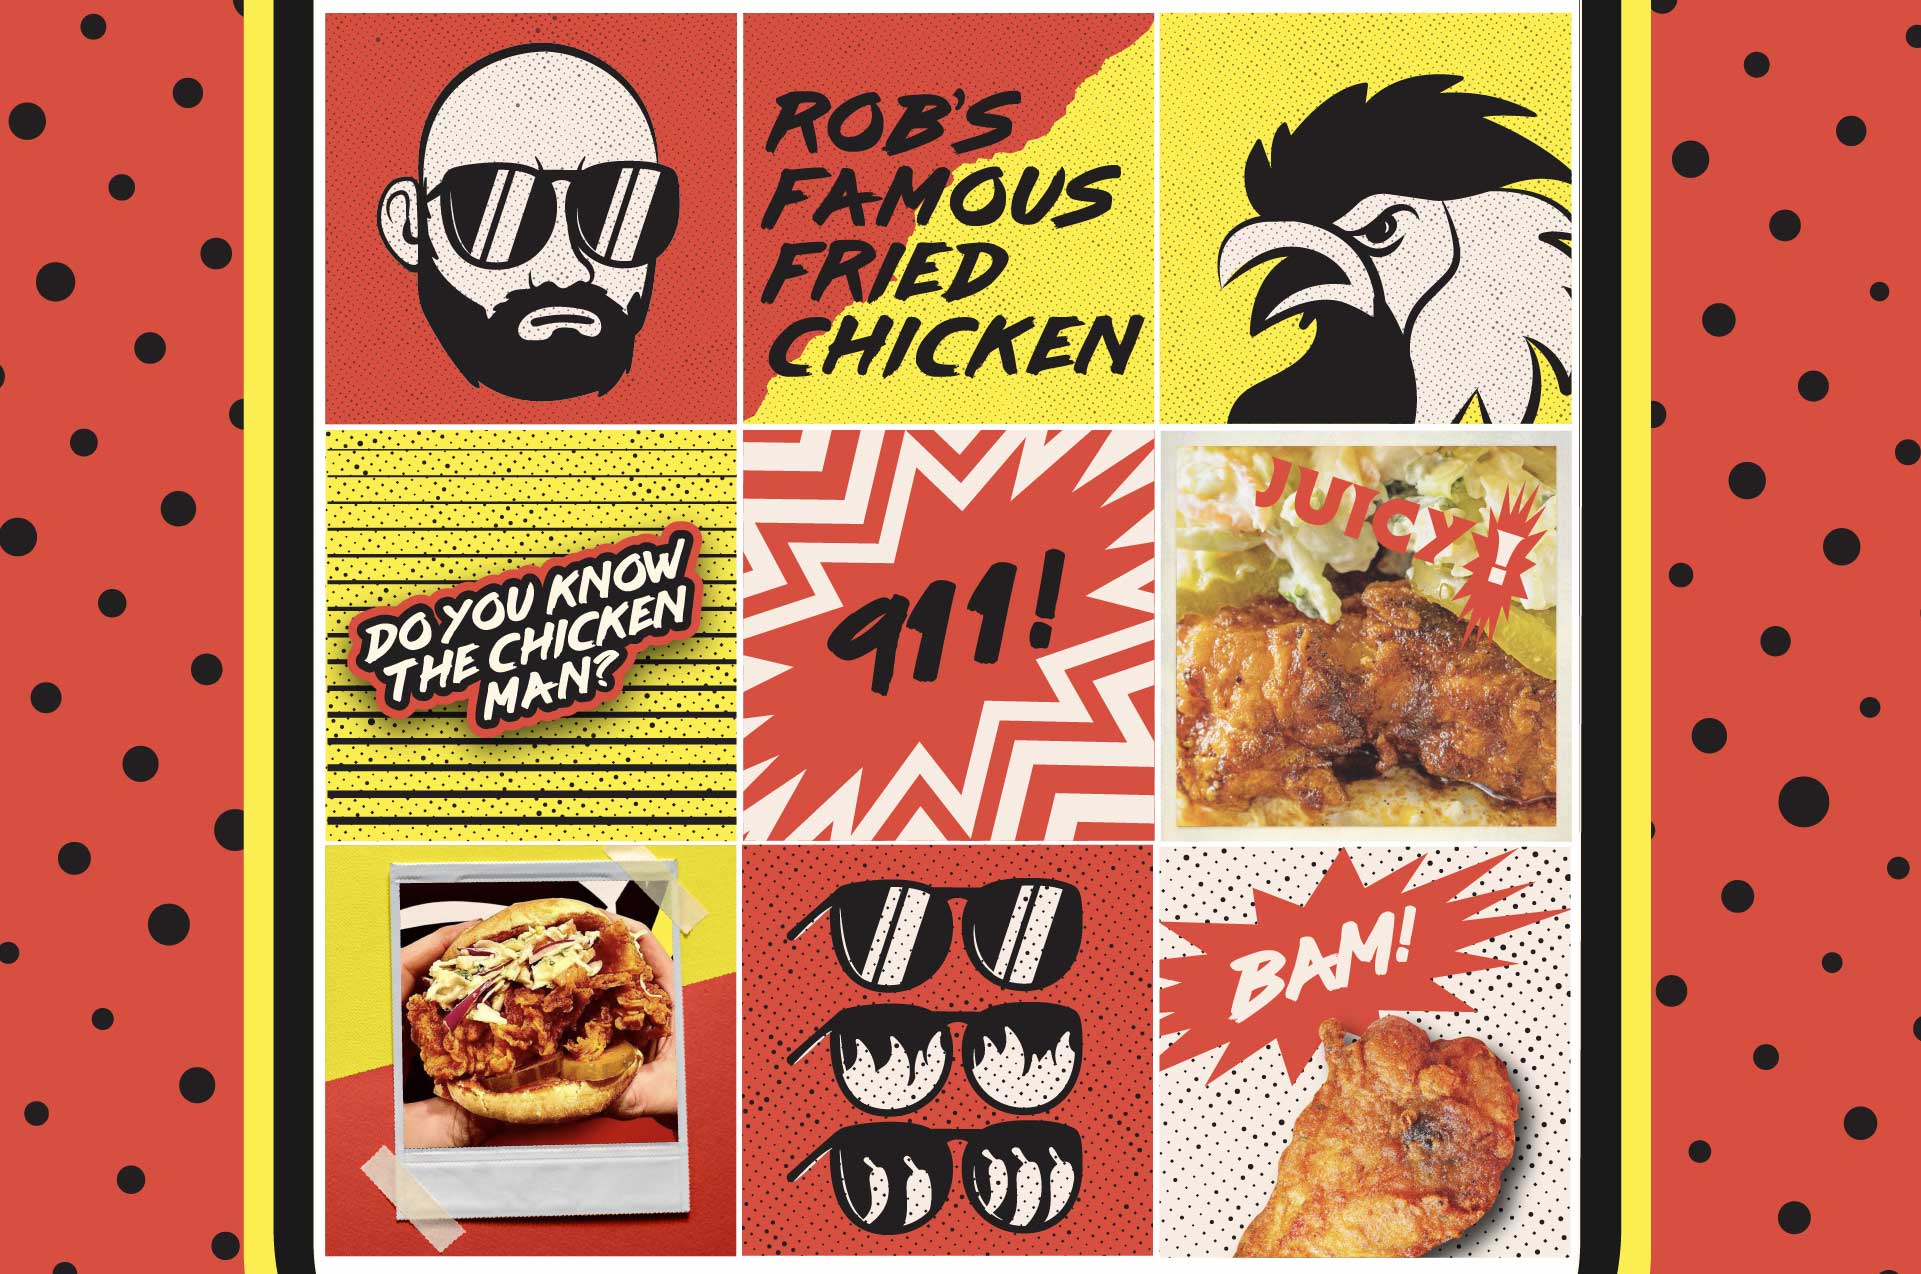 Instagram layout for Rob's Famous Fried Chicken